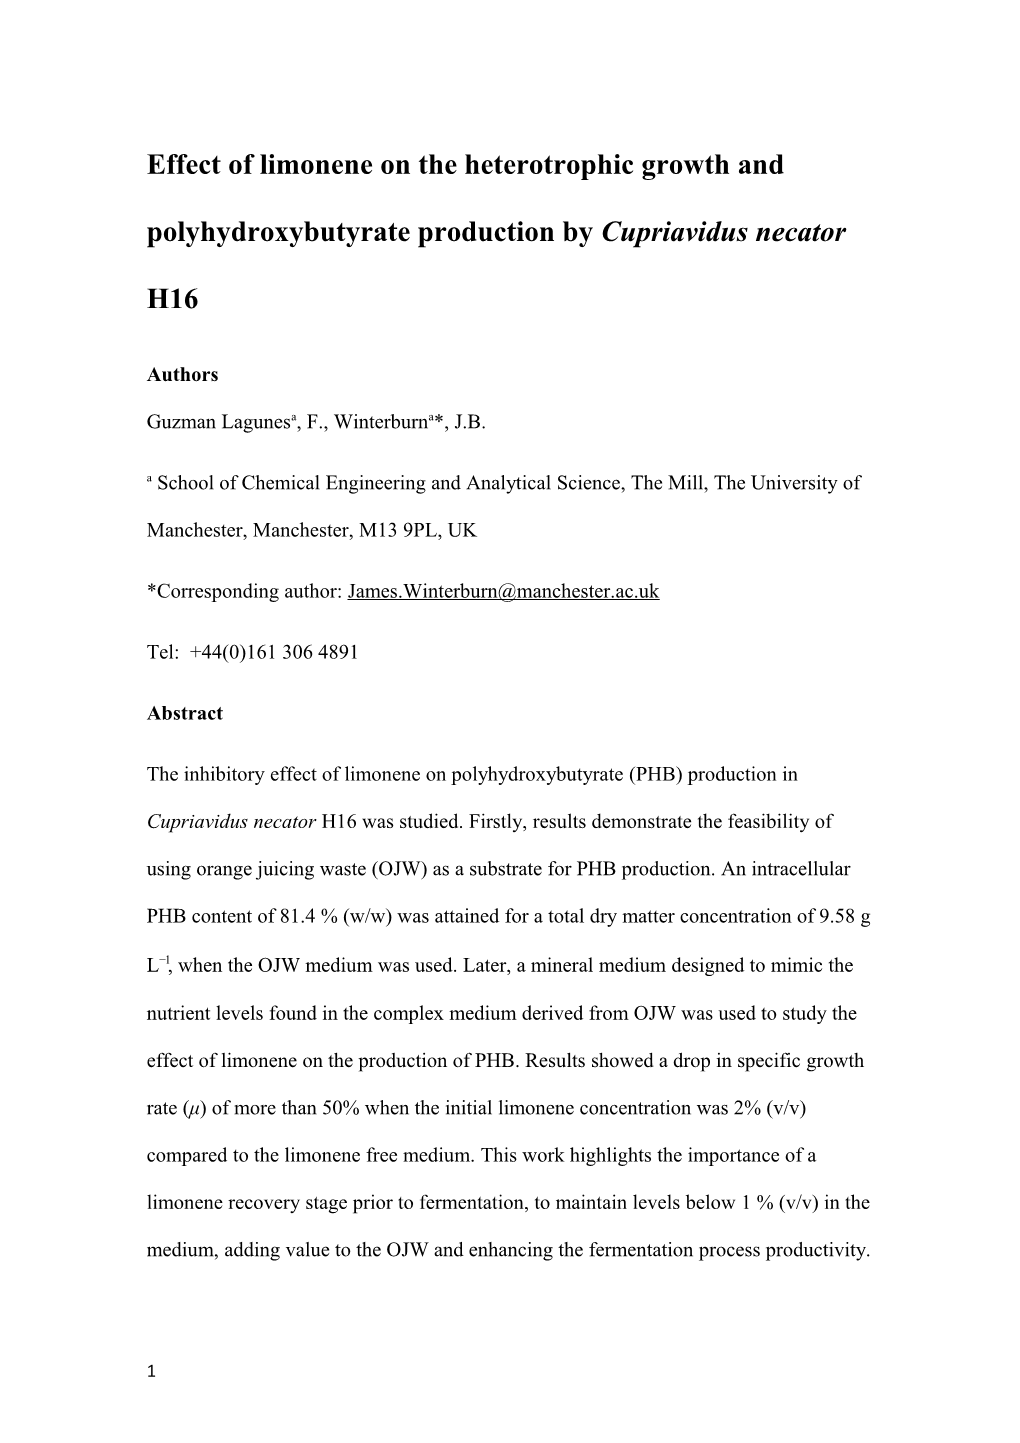 Effect of Limonene on the Heterotrophic Growth and Polyhydroxybutyrate Production By